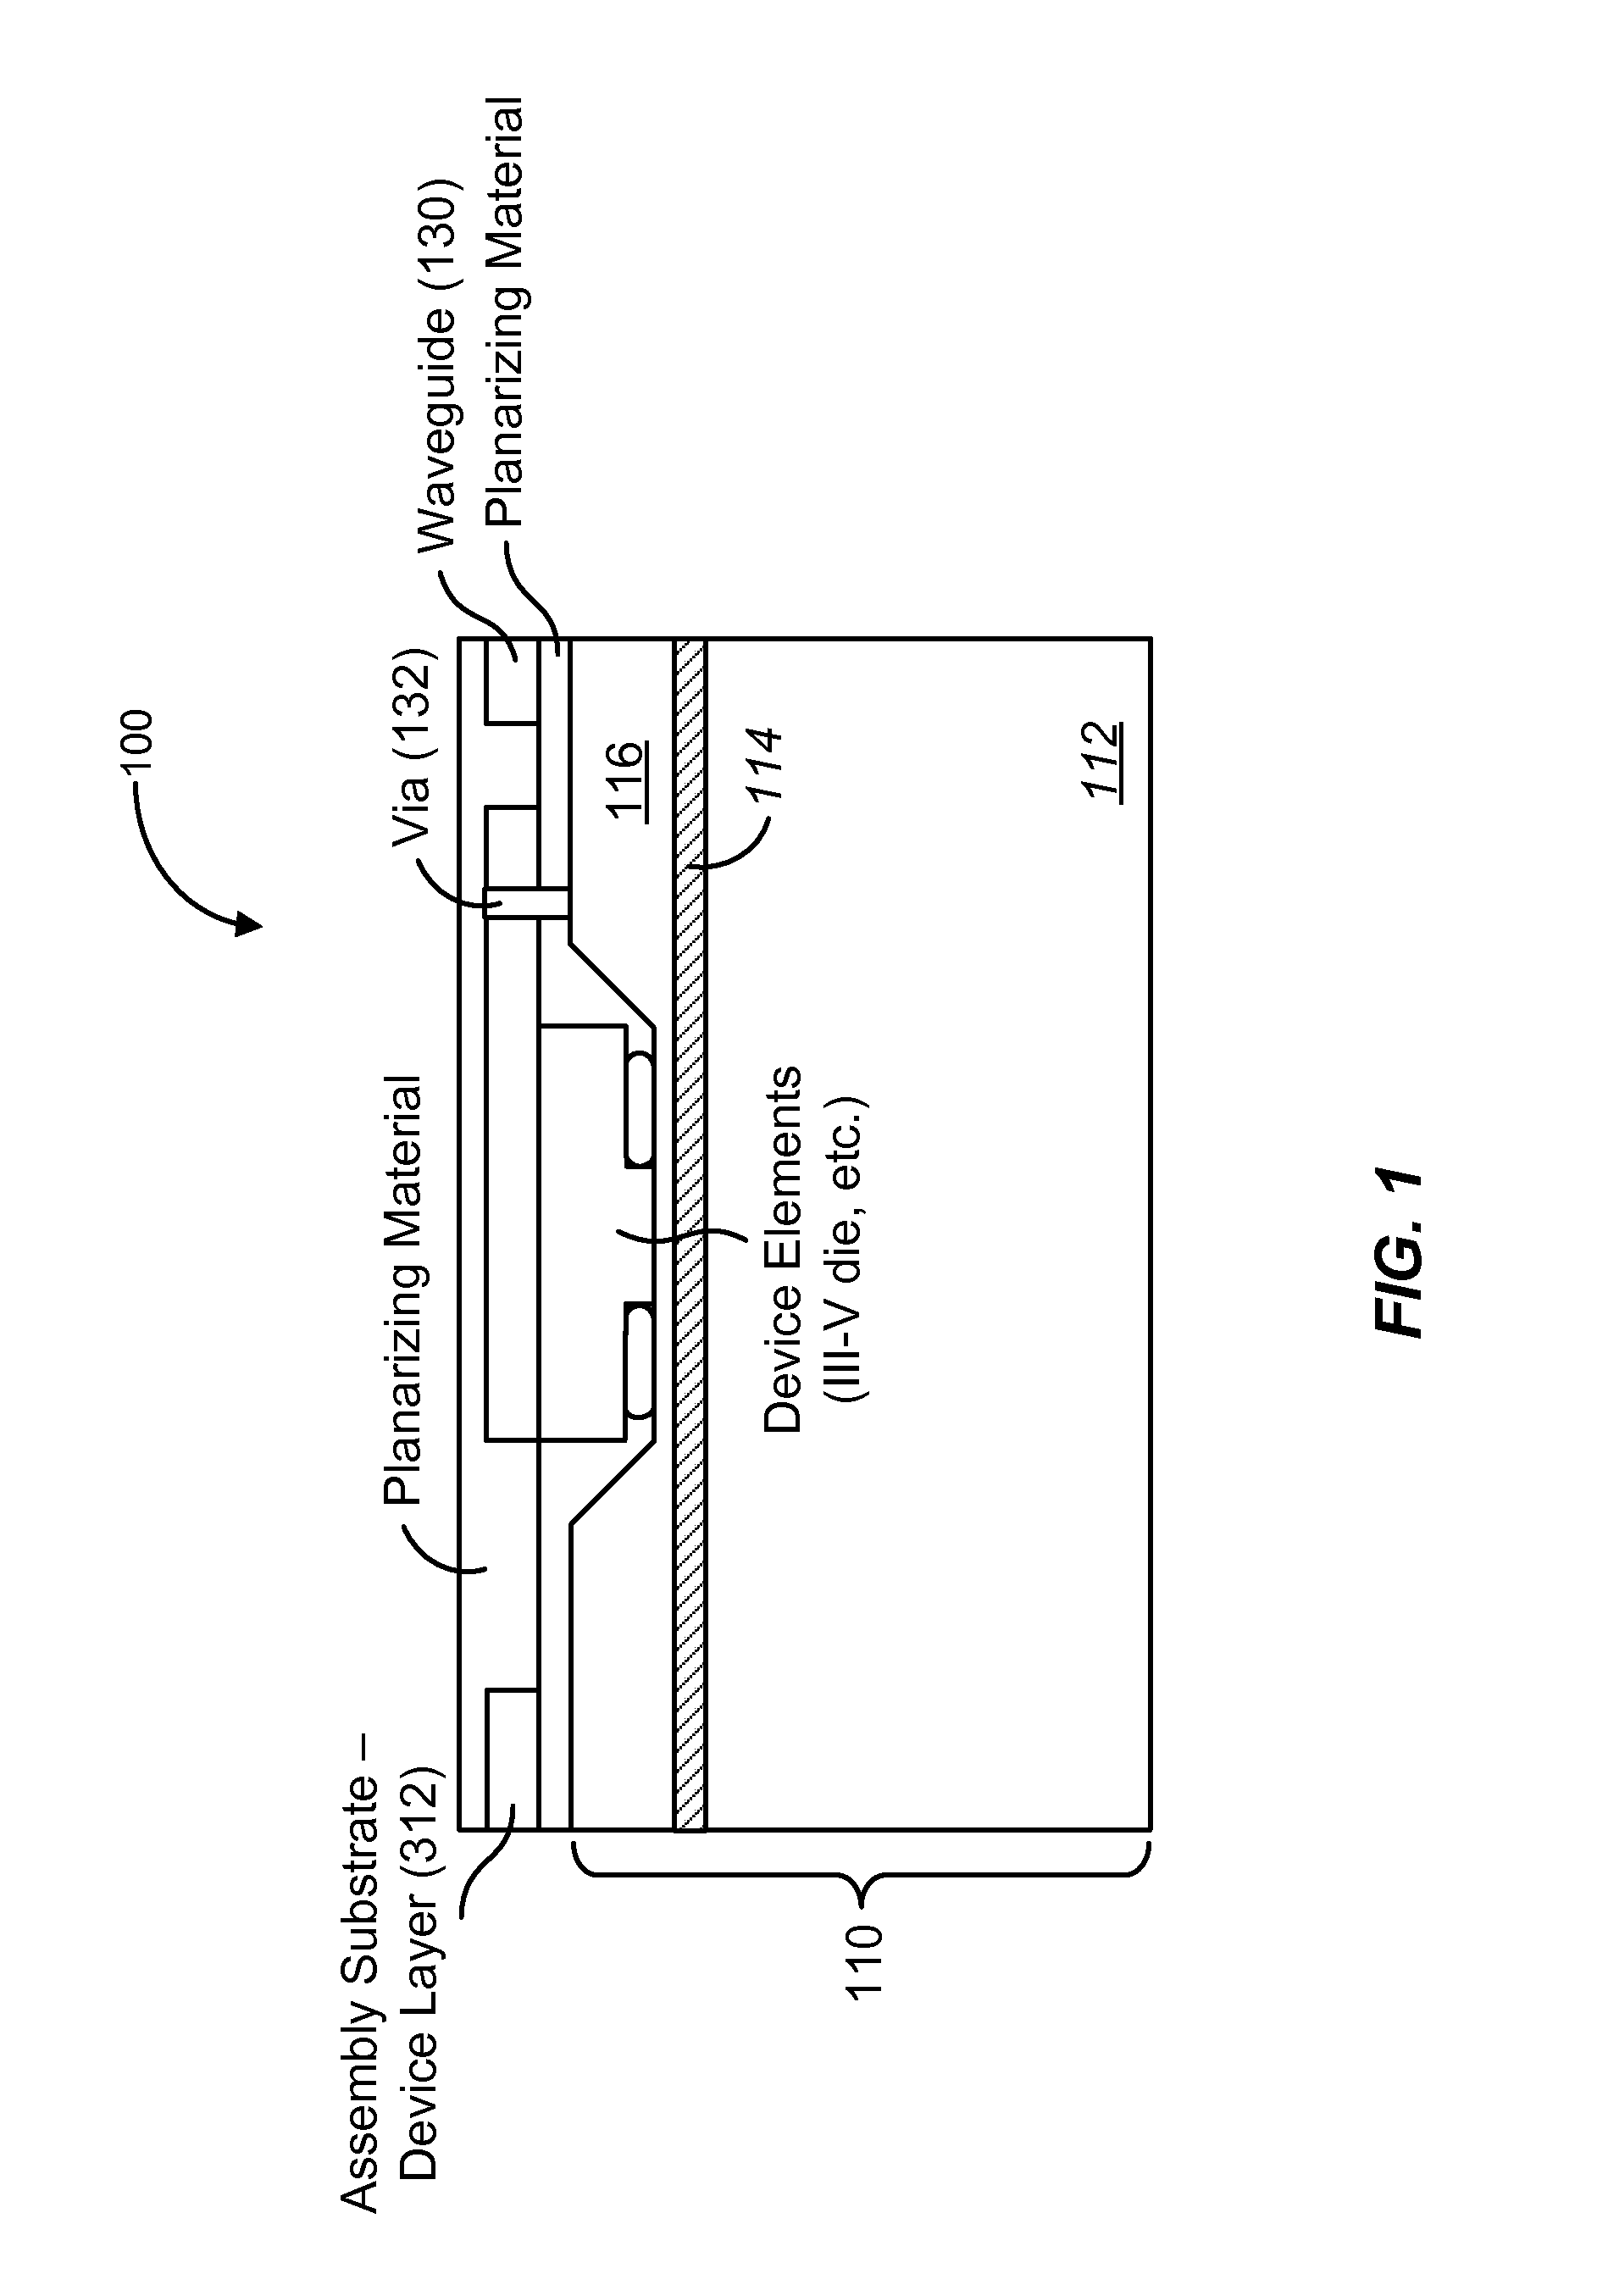 Method and system for template assisted wafer bonding